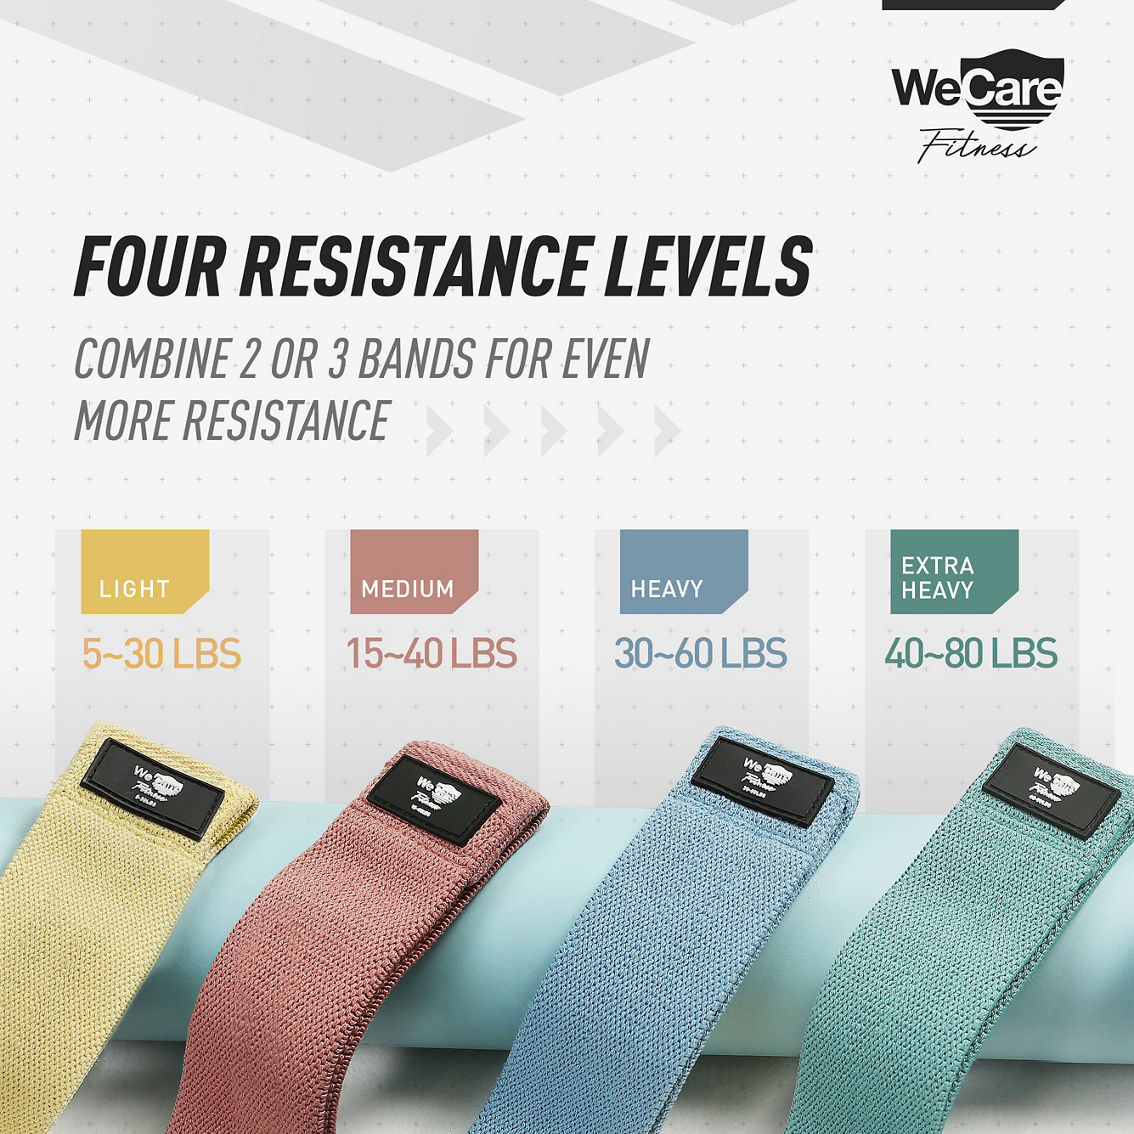 WeCare Fitness Full-Body Workout Resistance Bands 4 pk. - Image 6 of 10